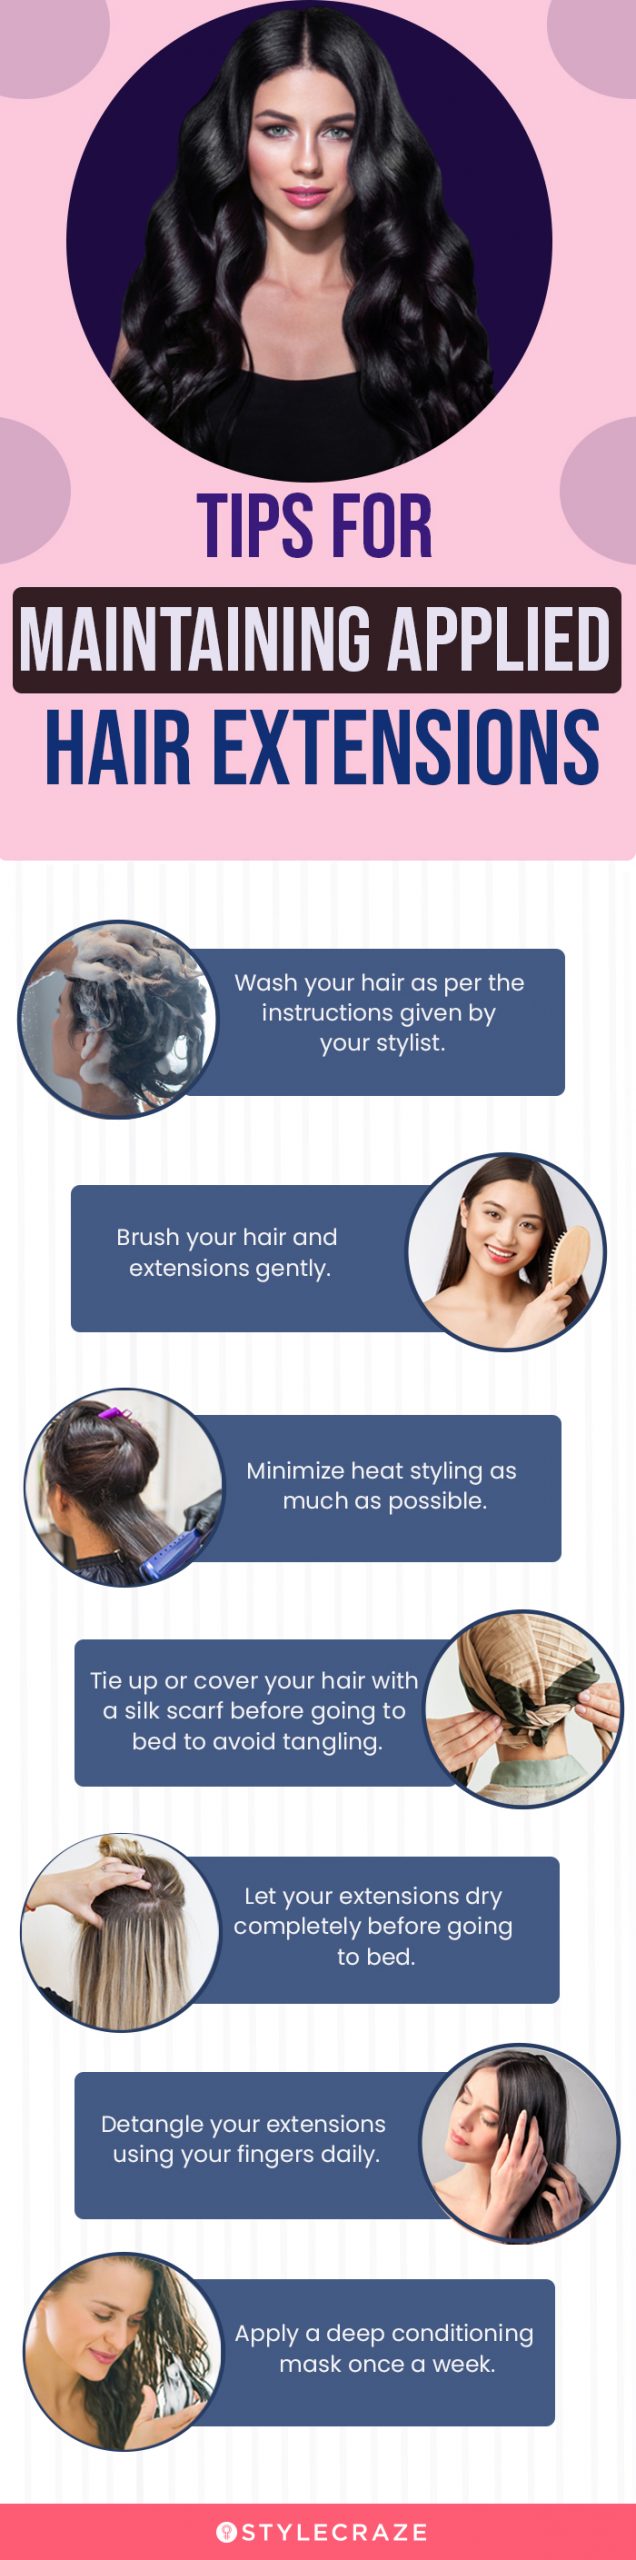 tips to maintaining extension hair (infographic)